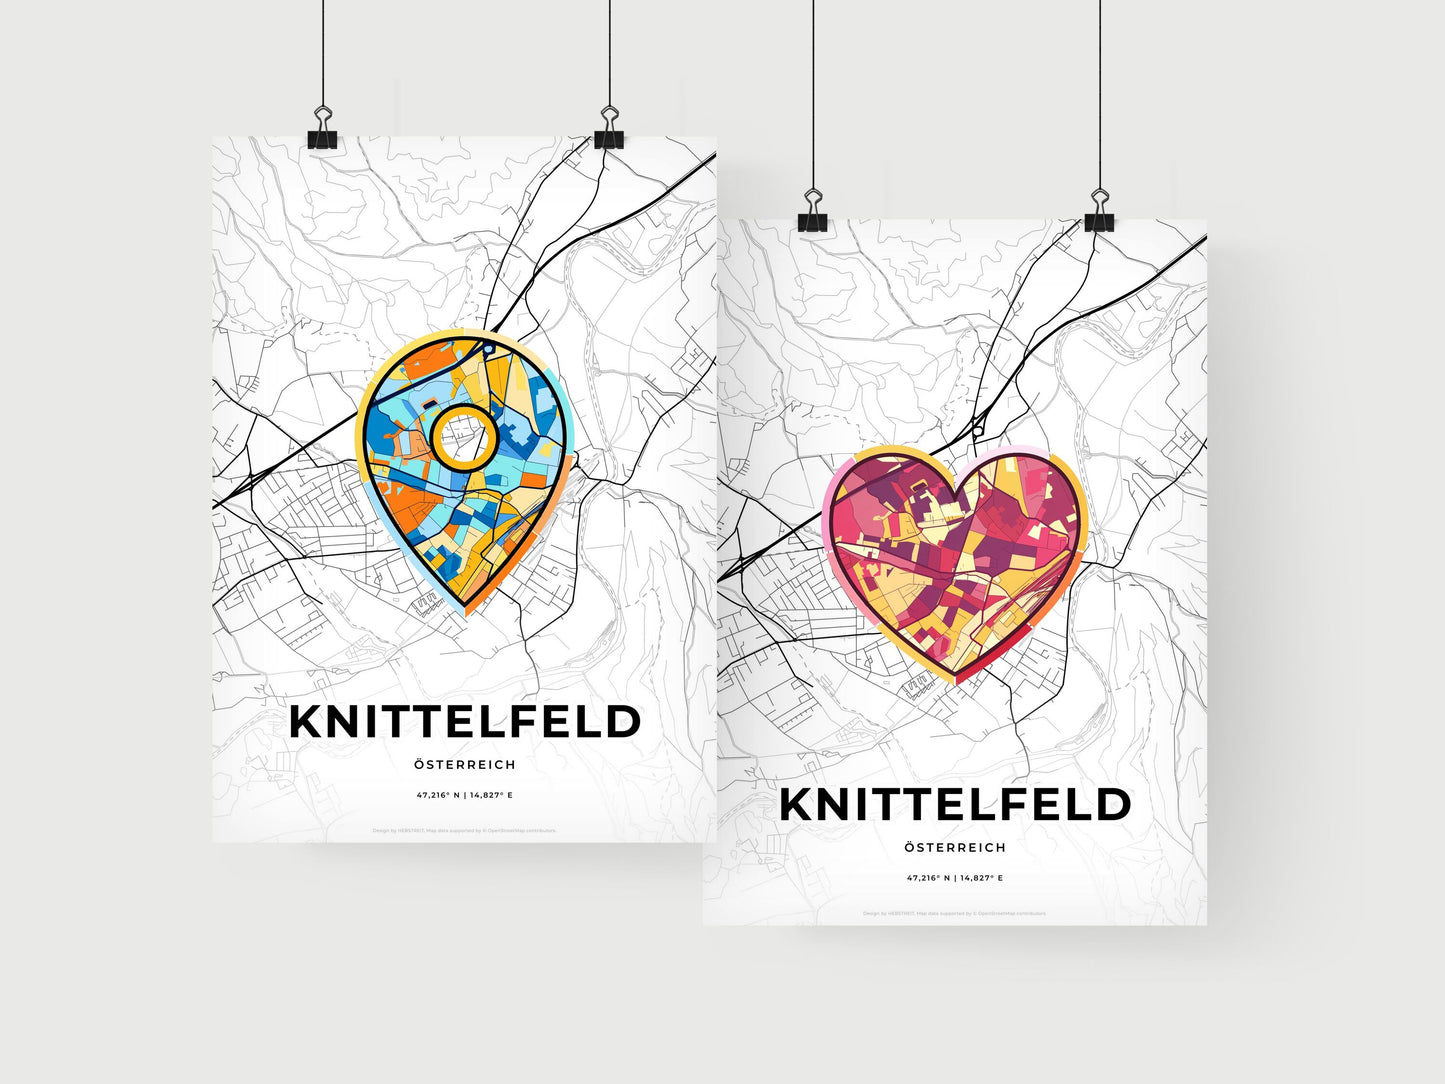 KNITTELFELD AUSTRIA minimal art map with a colorful icon. Where it all began, Couple map gift.